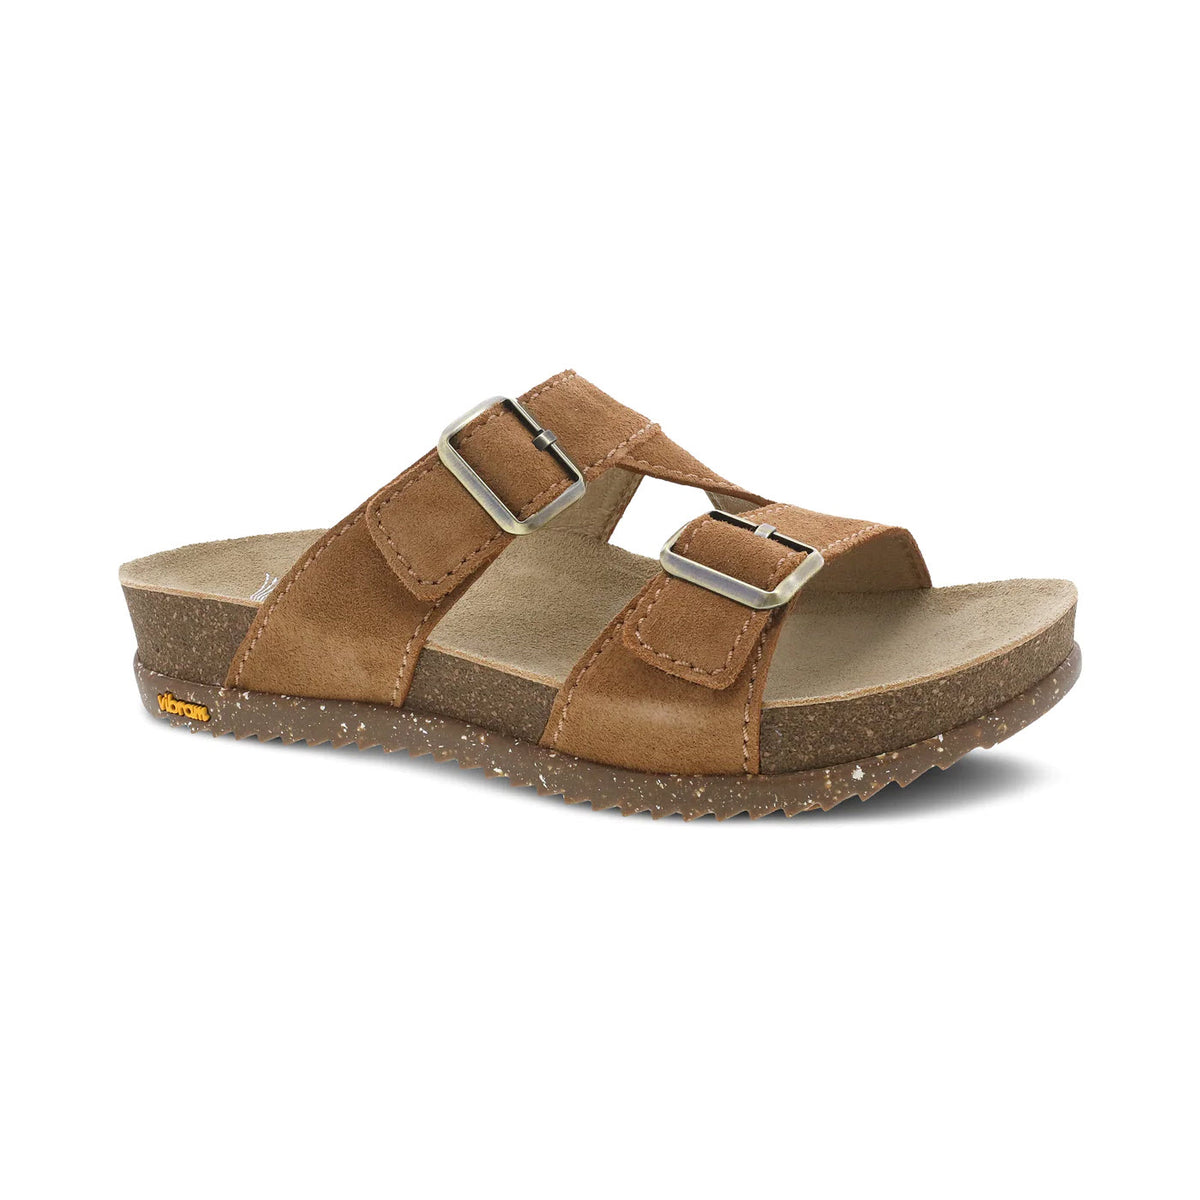 A single brown leather Dansko Dayna sandal with two adjustable straps and a Vibram Ecostep EVO rubber outsole, isolated on a white background.